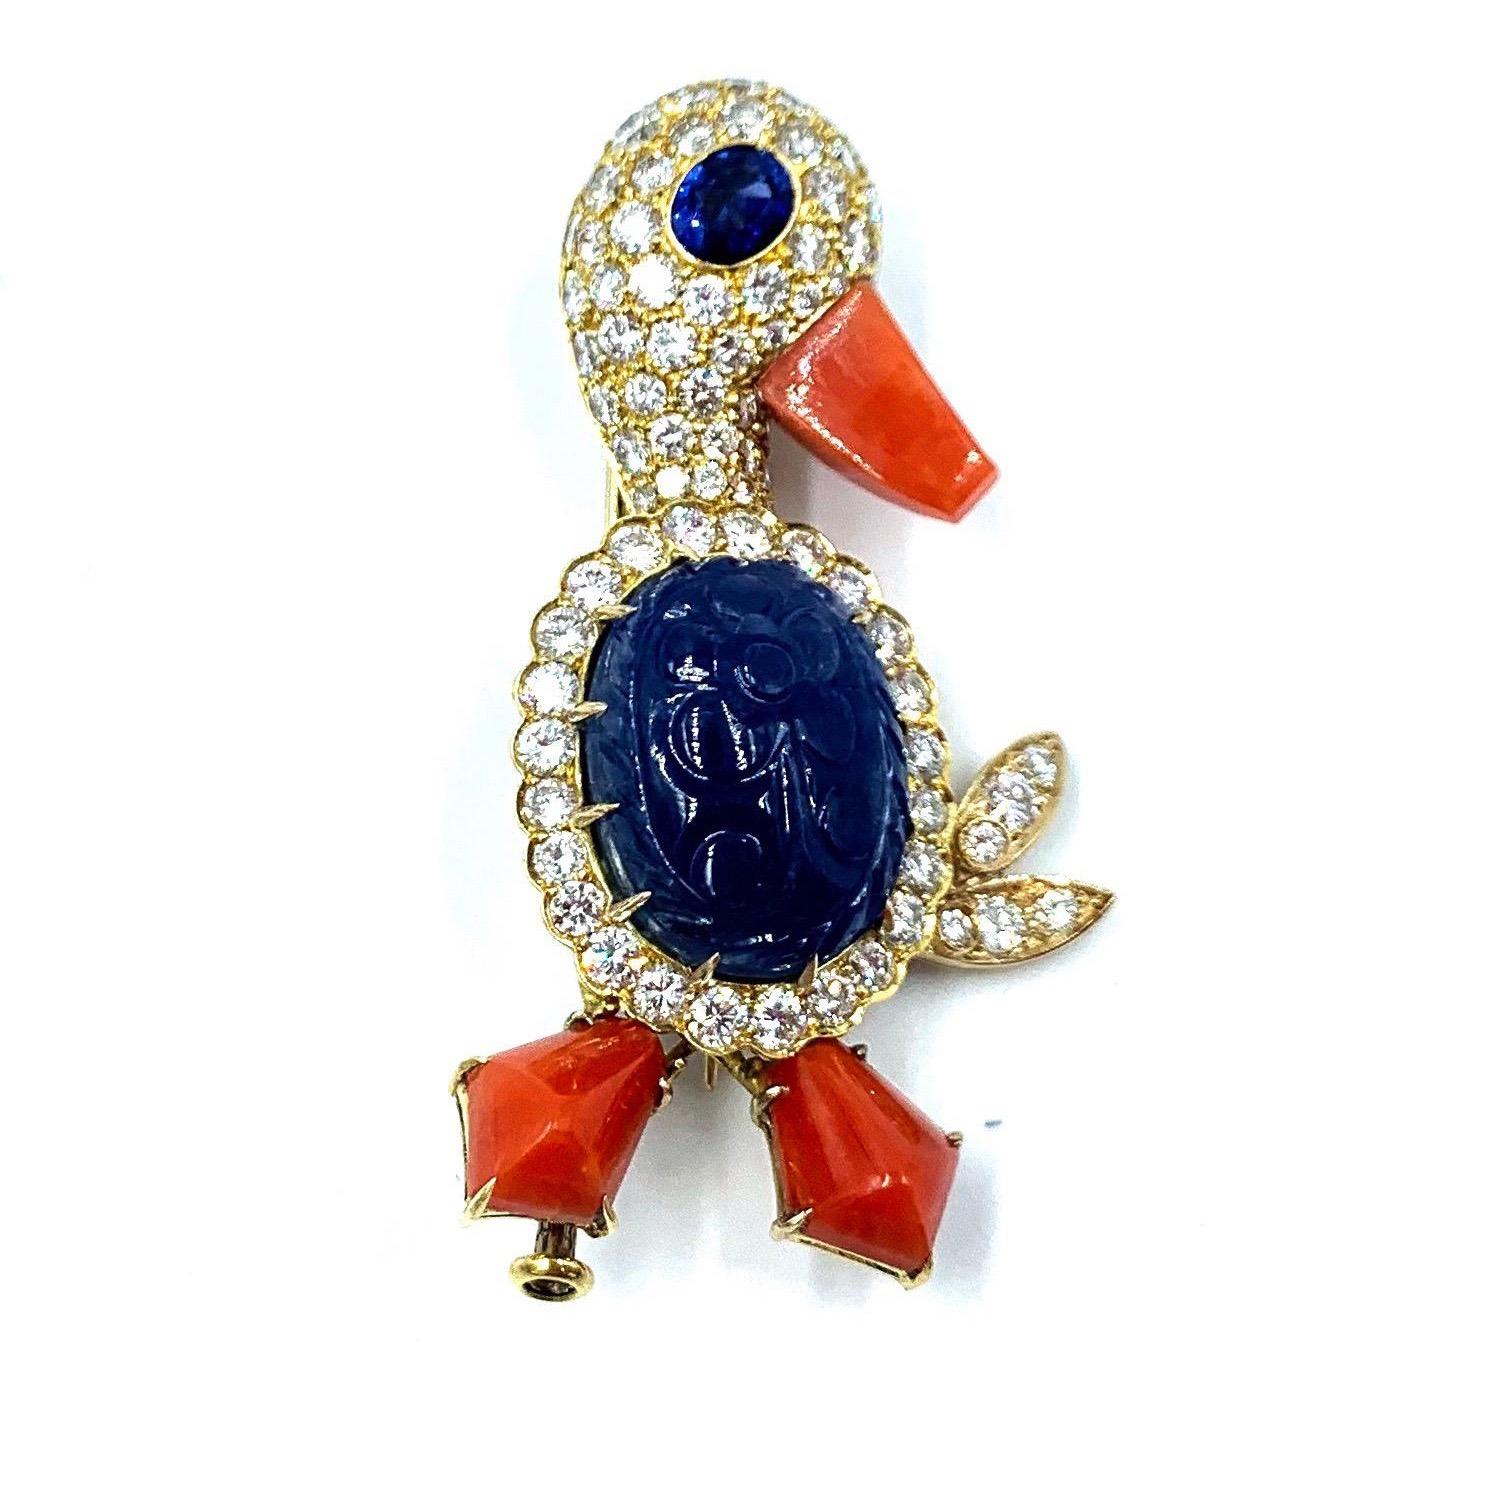 From the prestigious Perderzani jewelry family, a beautifully made duck brooch with an oval-shaped carved sapphire body, as well as a coral beak, and feet. Surrounded by diamonds this duck brooch is set in 18k gold.